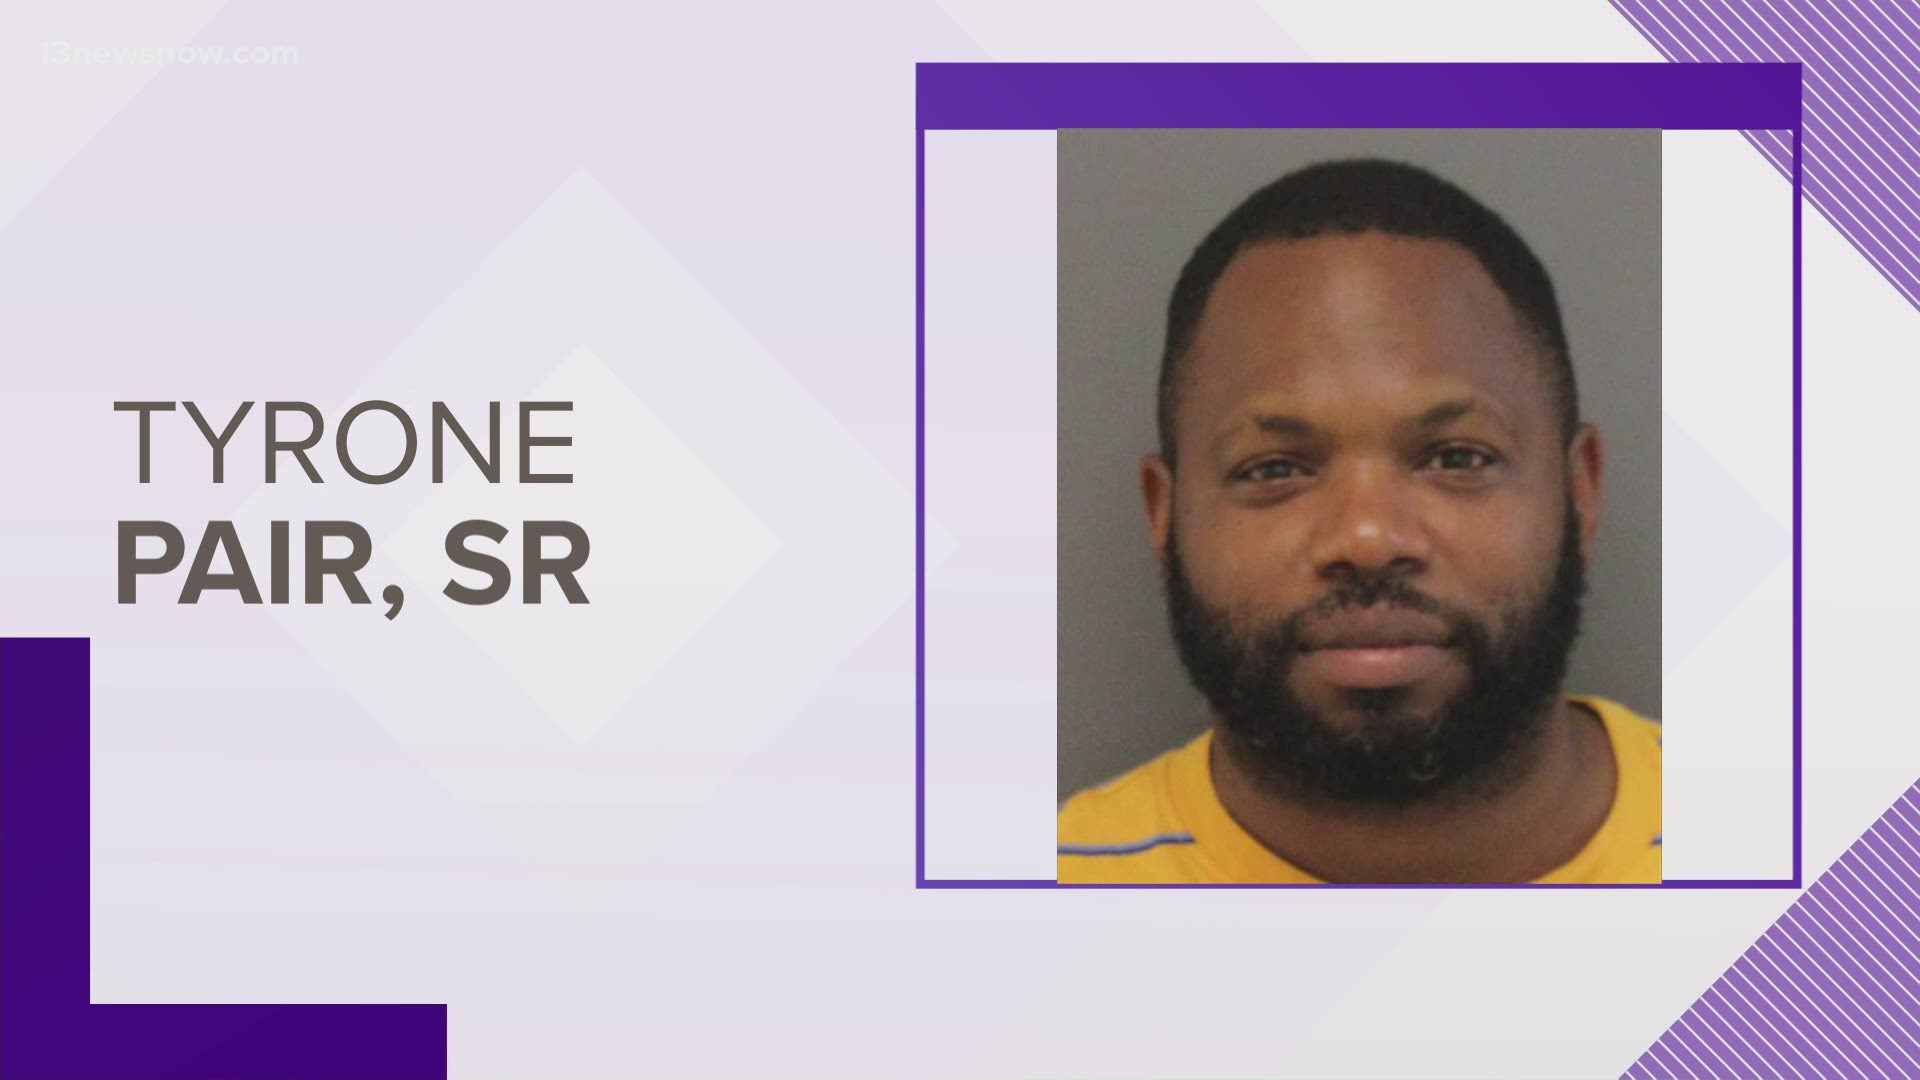 Police charged 39-year-old Tyrone Lamont Pair Sr. with one count of second-degree murder and three counts of violation of a protective order.